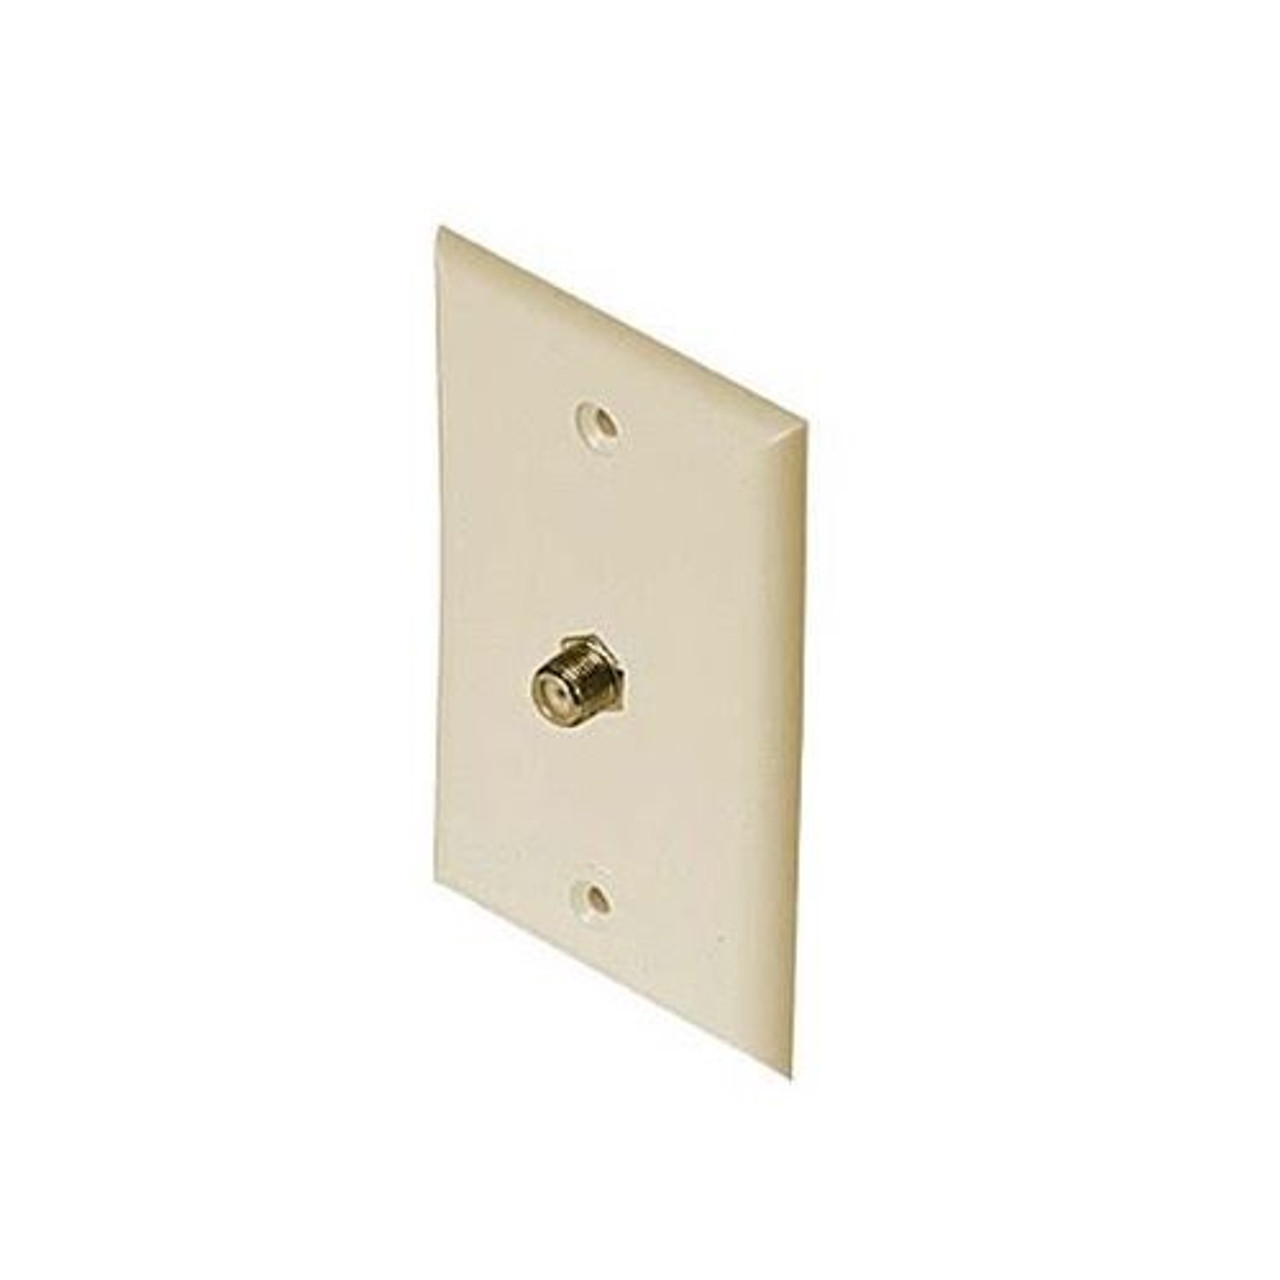 Eagle F Jack Wall Plate Ivory Coaxial Gold TV Video 75 Ohm Flush Mount Type Ivory Wall Plate Coaxial Cable Gold Magavox M61022 75 Ohm Jack TV Video Digital Antenna Satellite Single